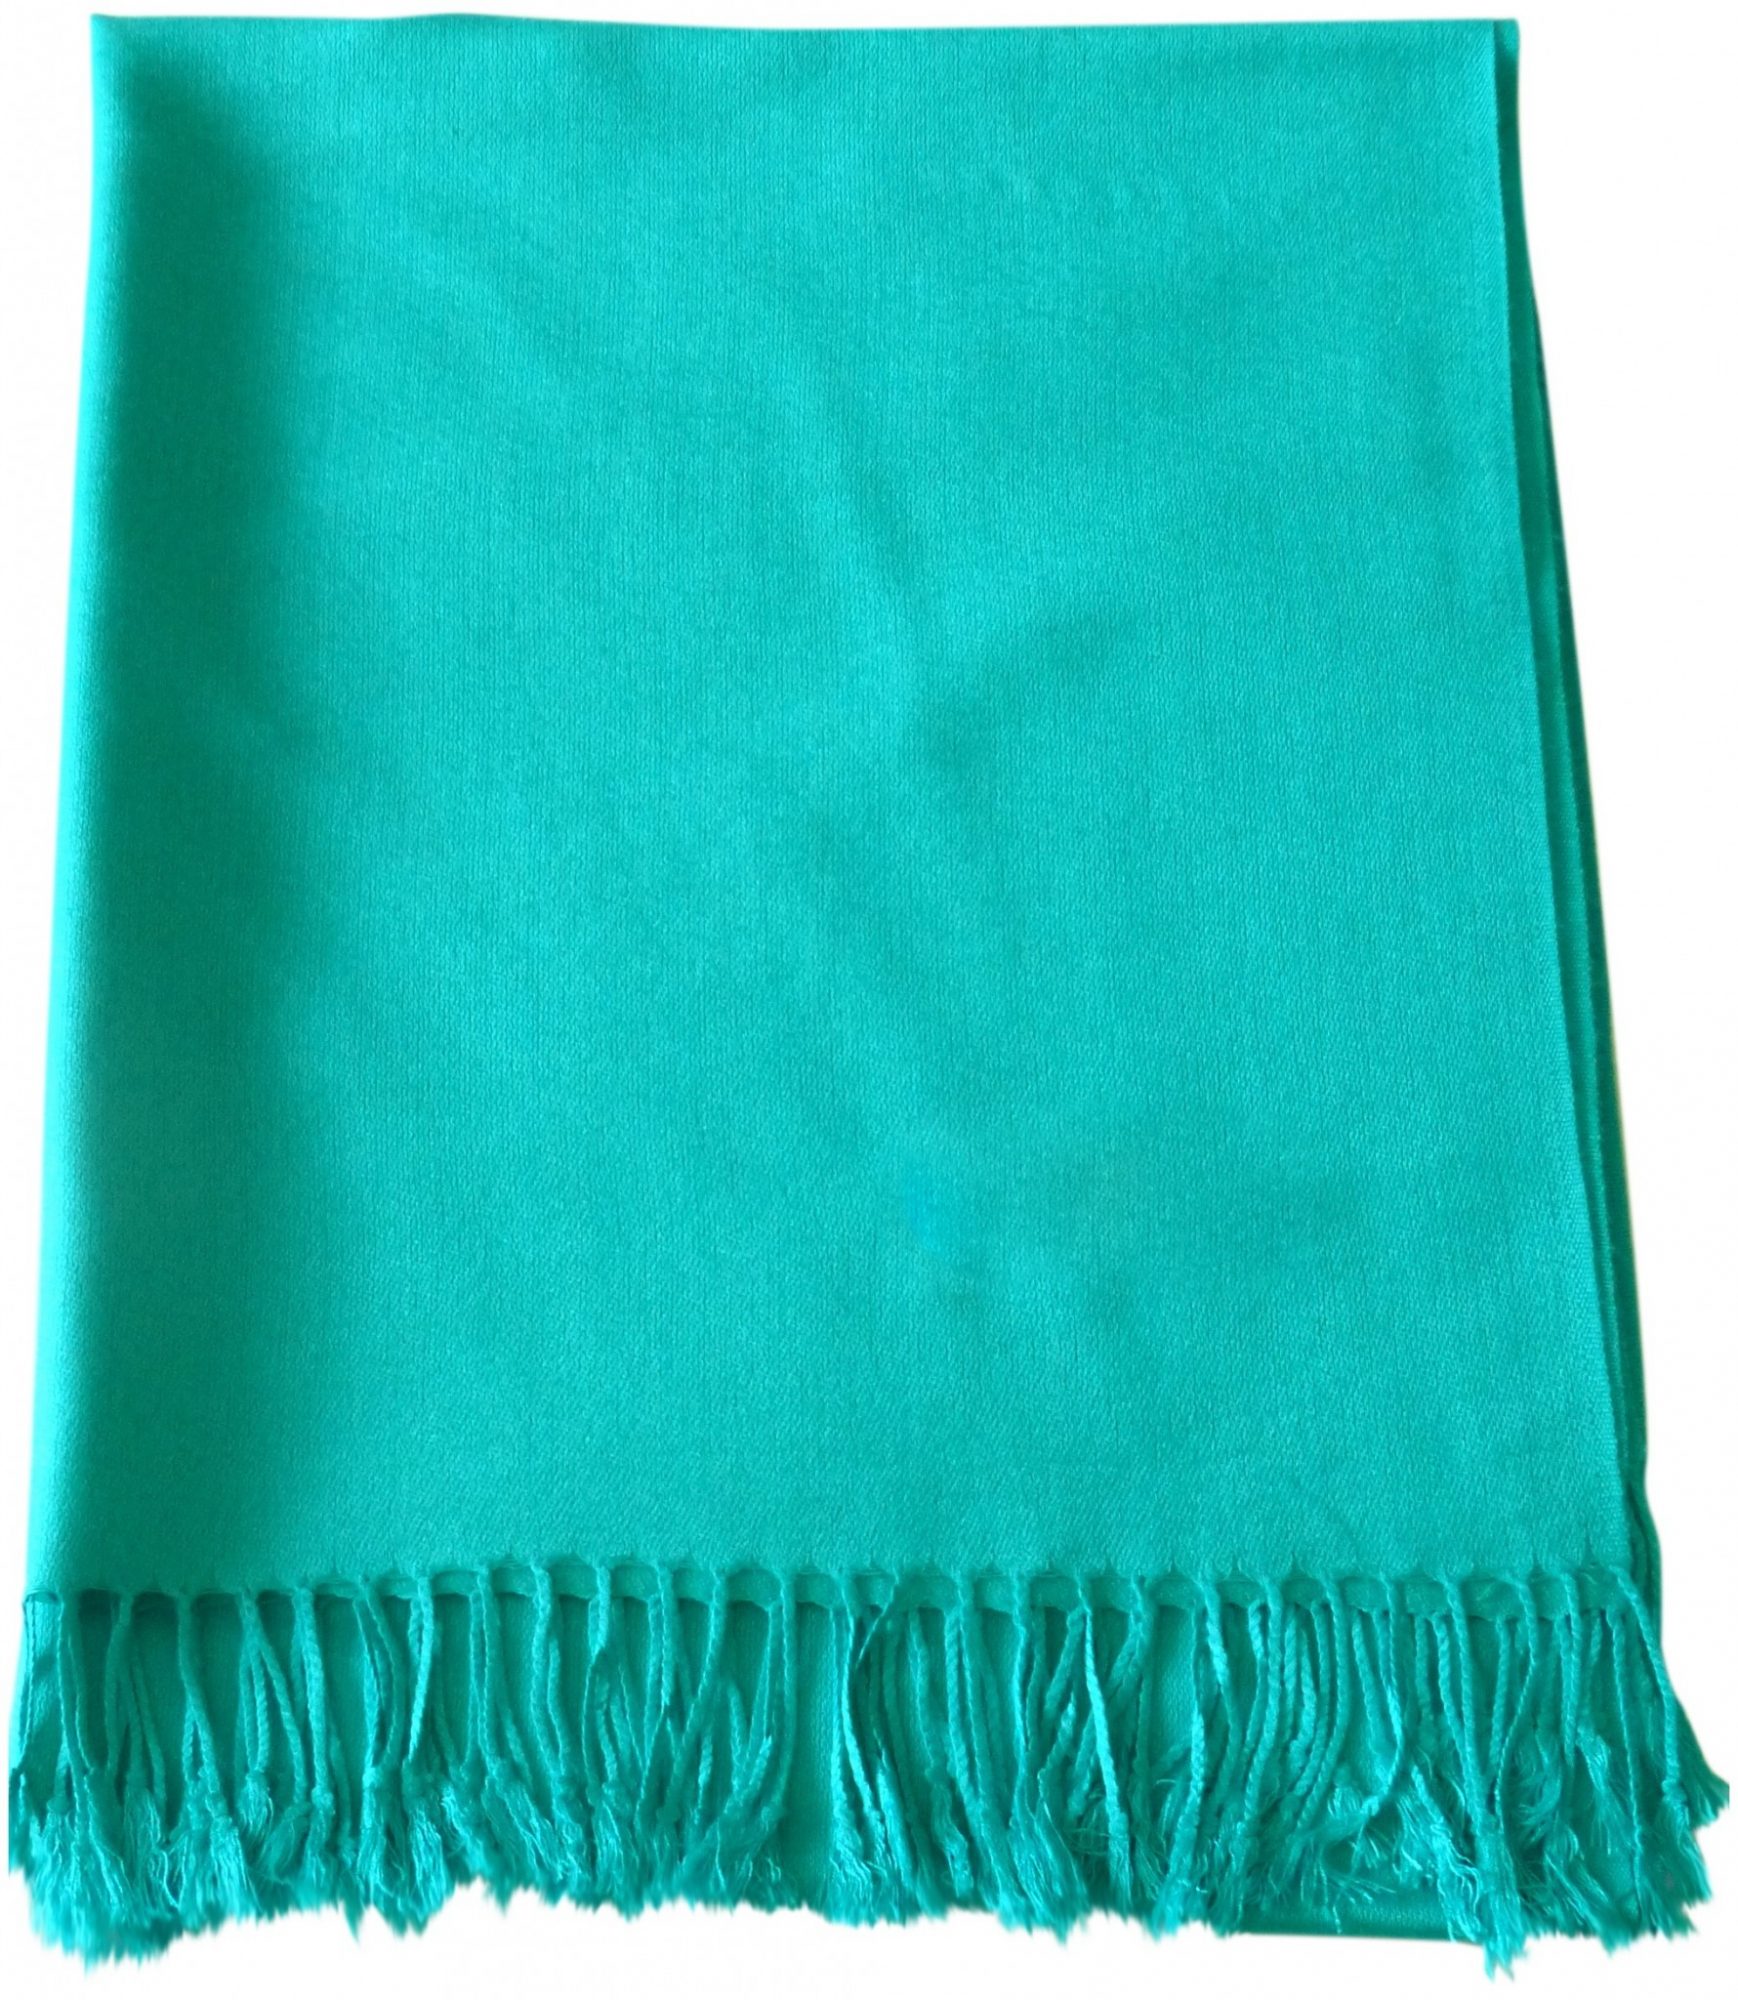 Blue Green Solid Color Design Pashmina Shawl Scarf Wrap Pashminas Shawls NEW a1010-359